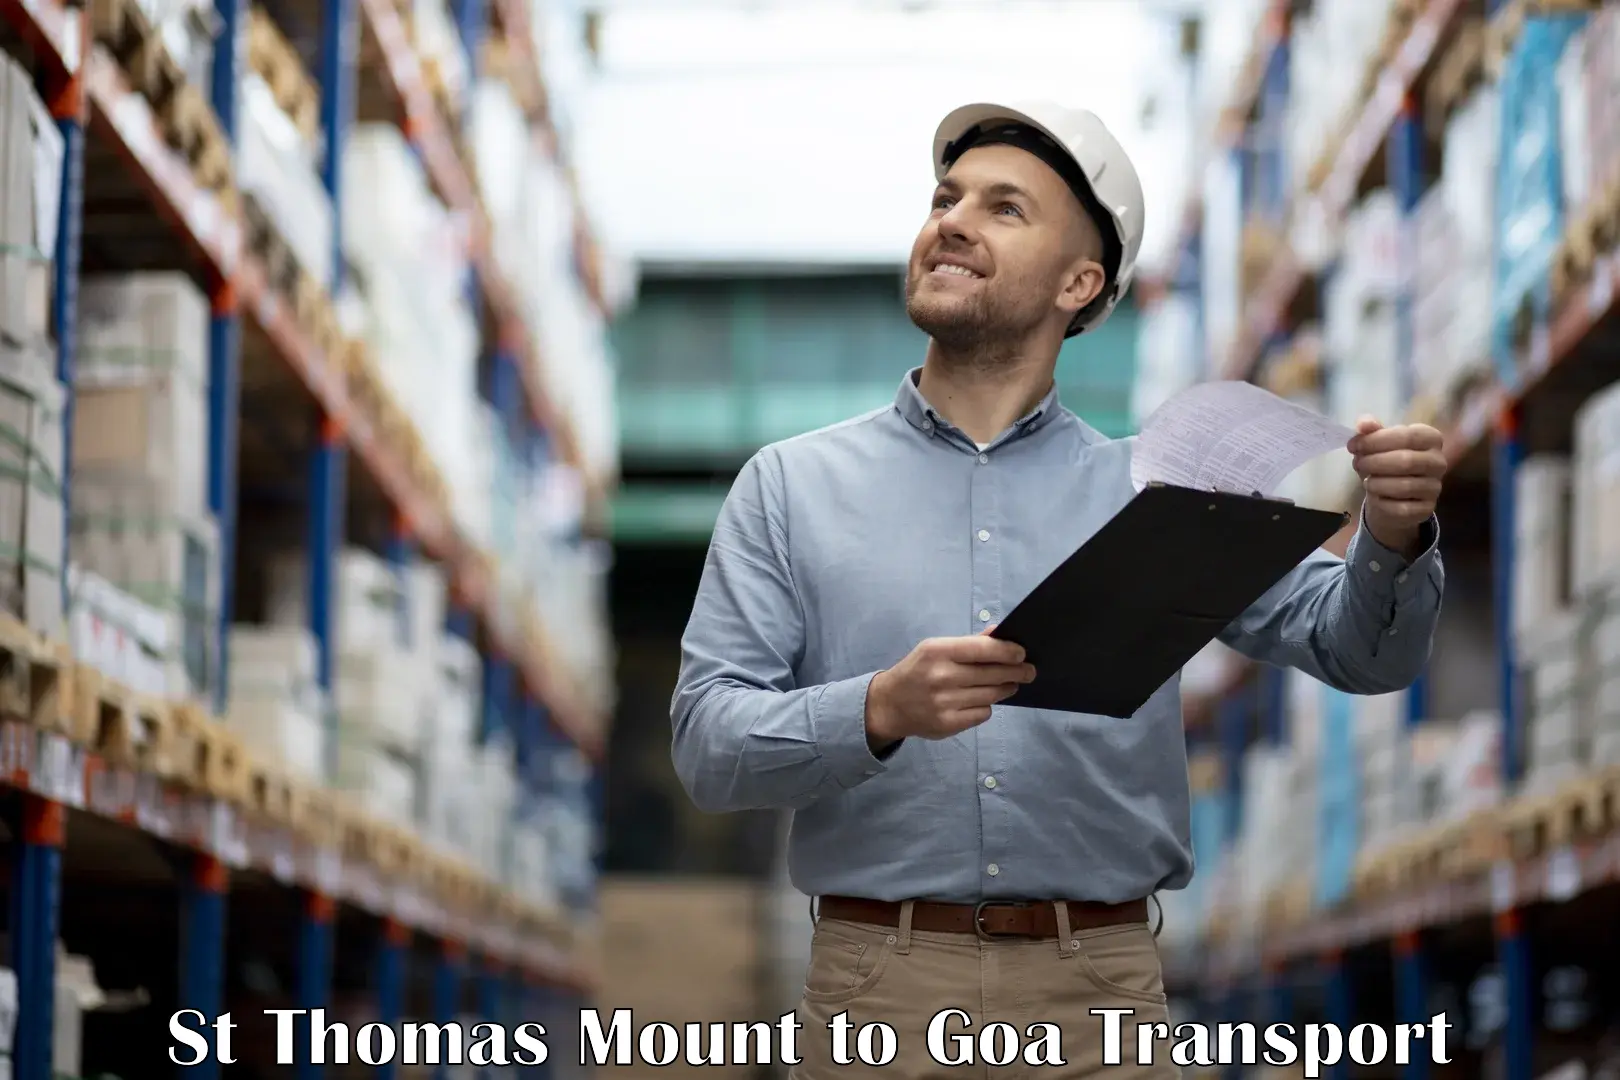 Commercial transport service St Thomas Mount to Goa